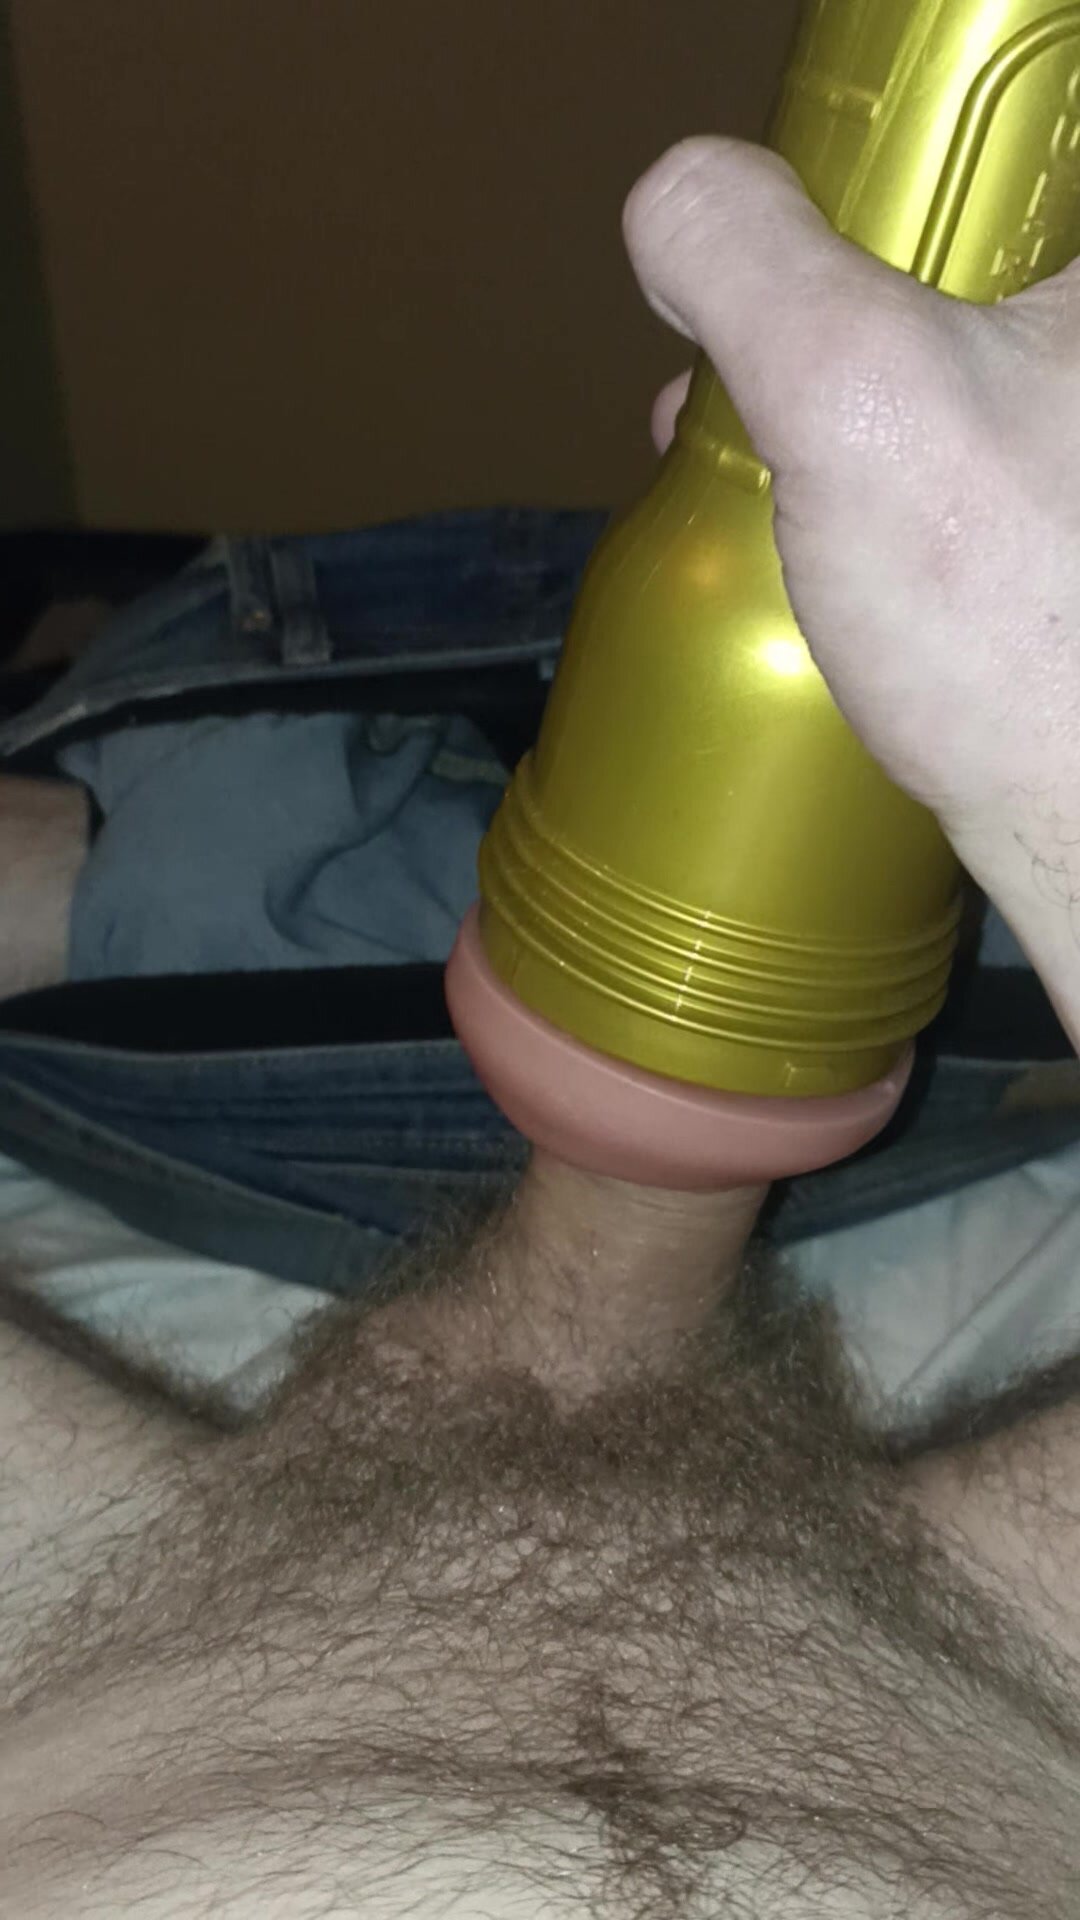 Cumming into fleshlight and letting it drip out